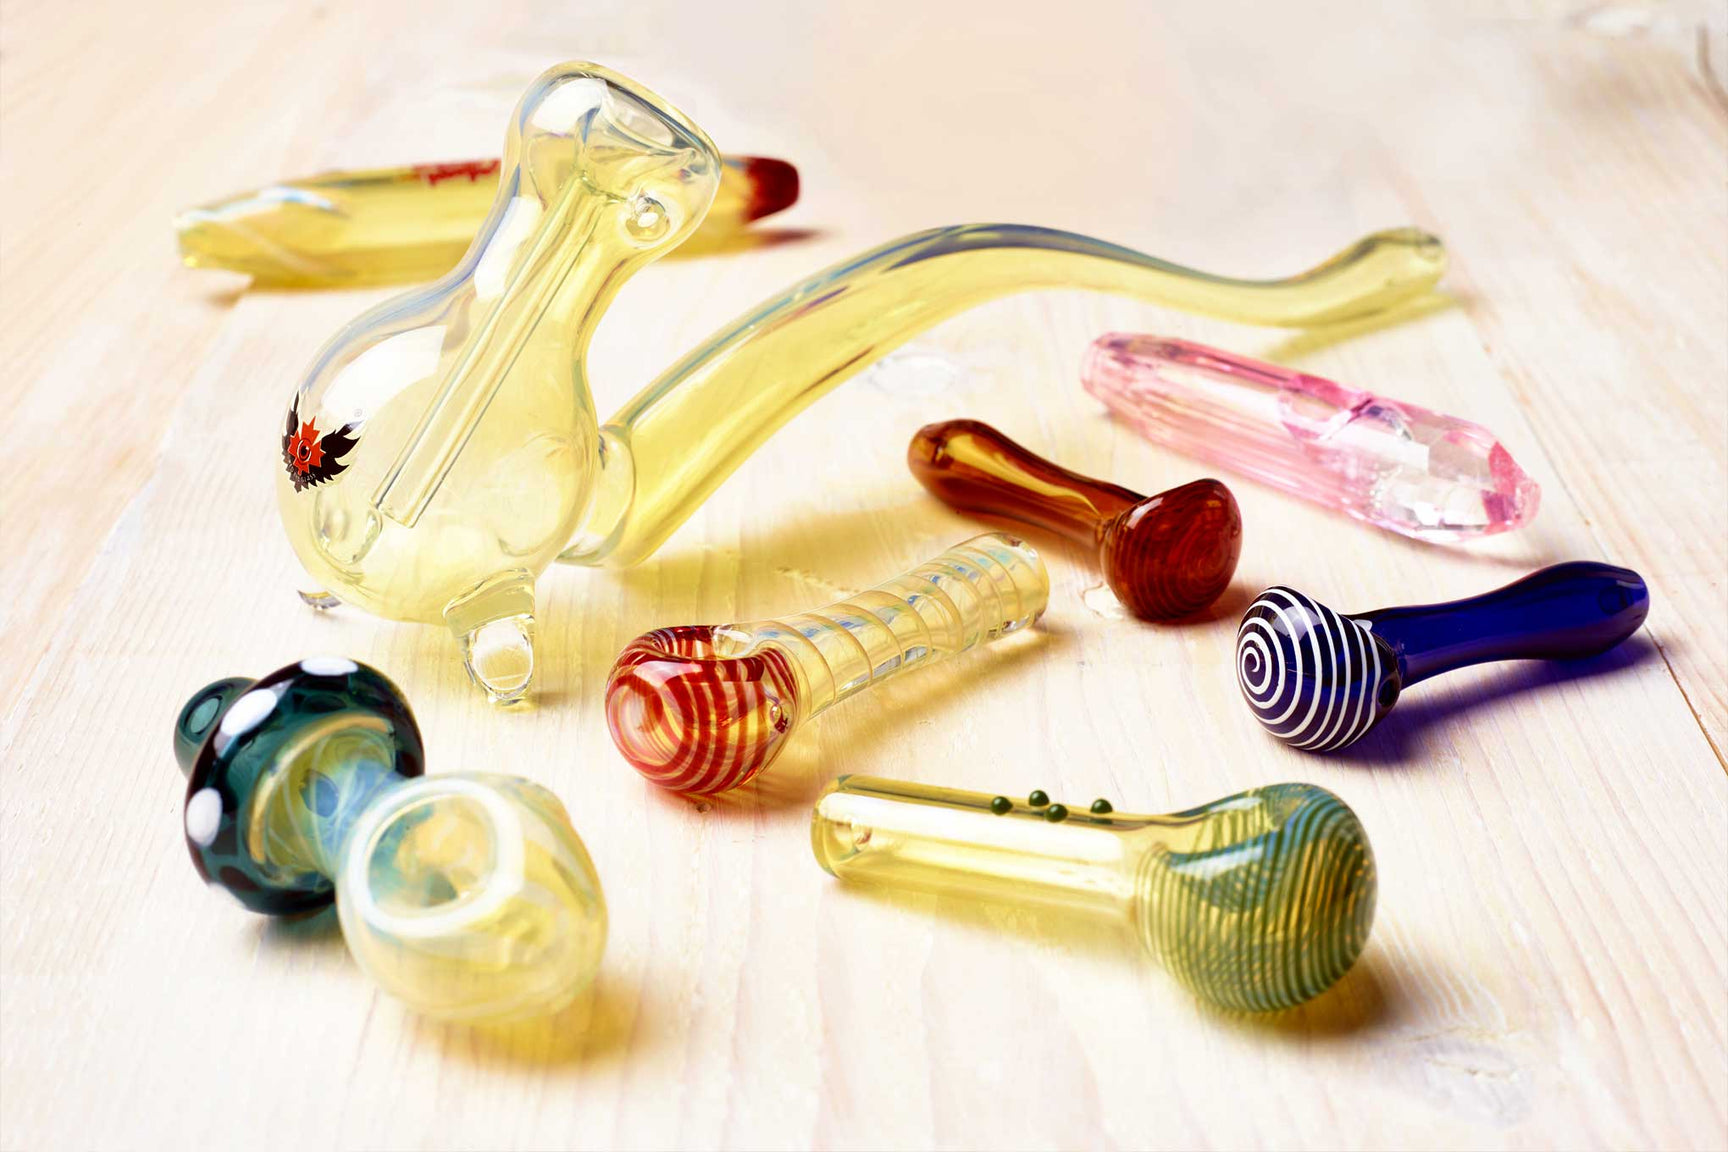 All about smoking accessories and how to use them